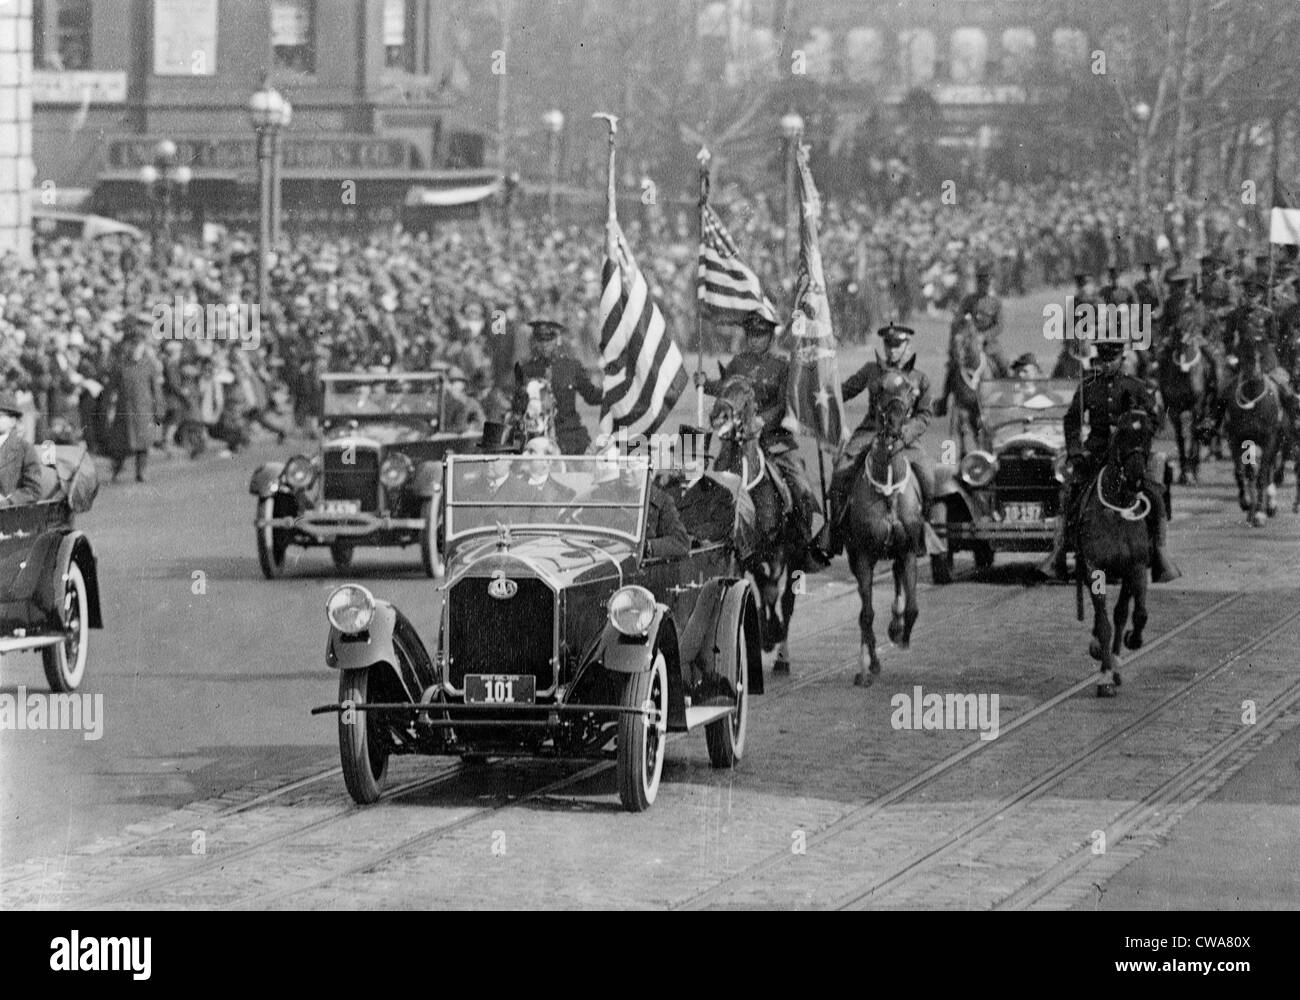 President Calvin Coolidge (1872-33) and others riding in a car during his inaugural parade. March 4, 1925. Stock Photo